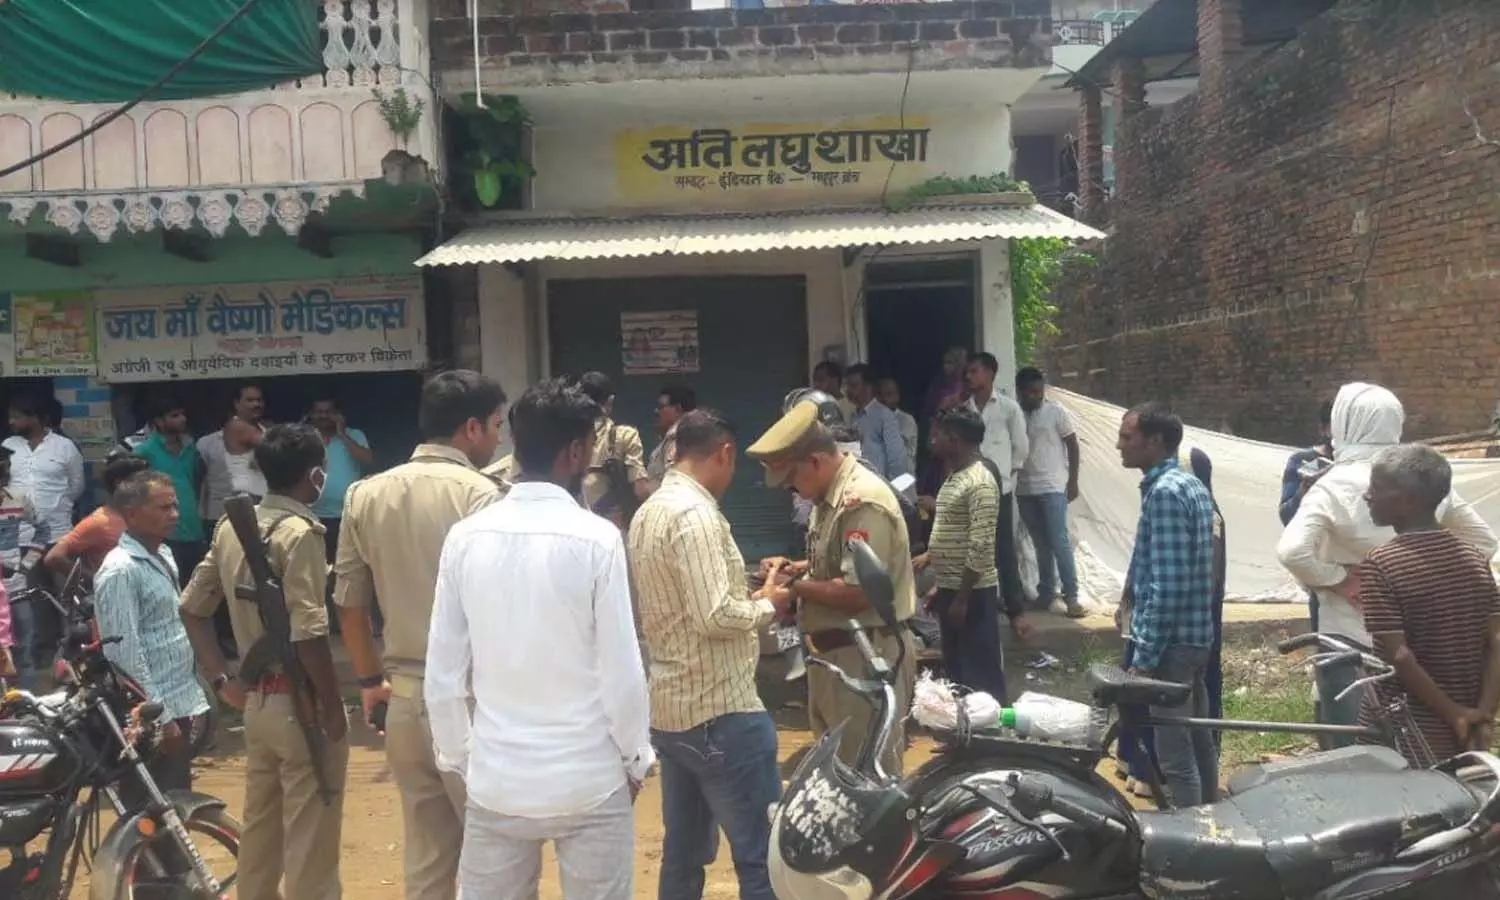 1.17 lakh looted in broad daylight from small branch of Indian Bank